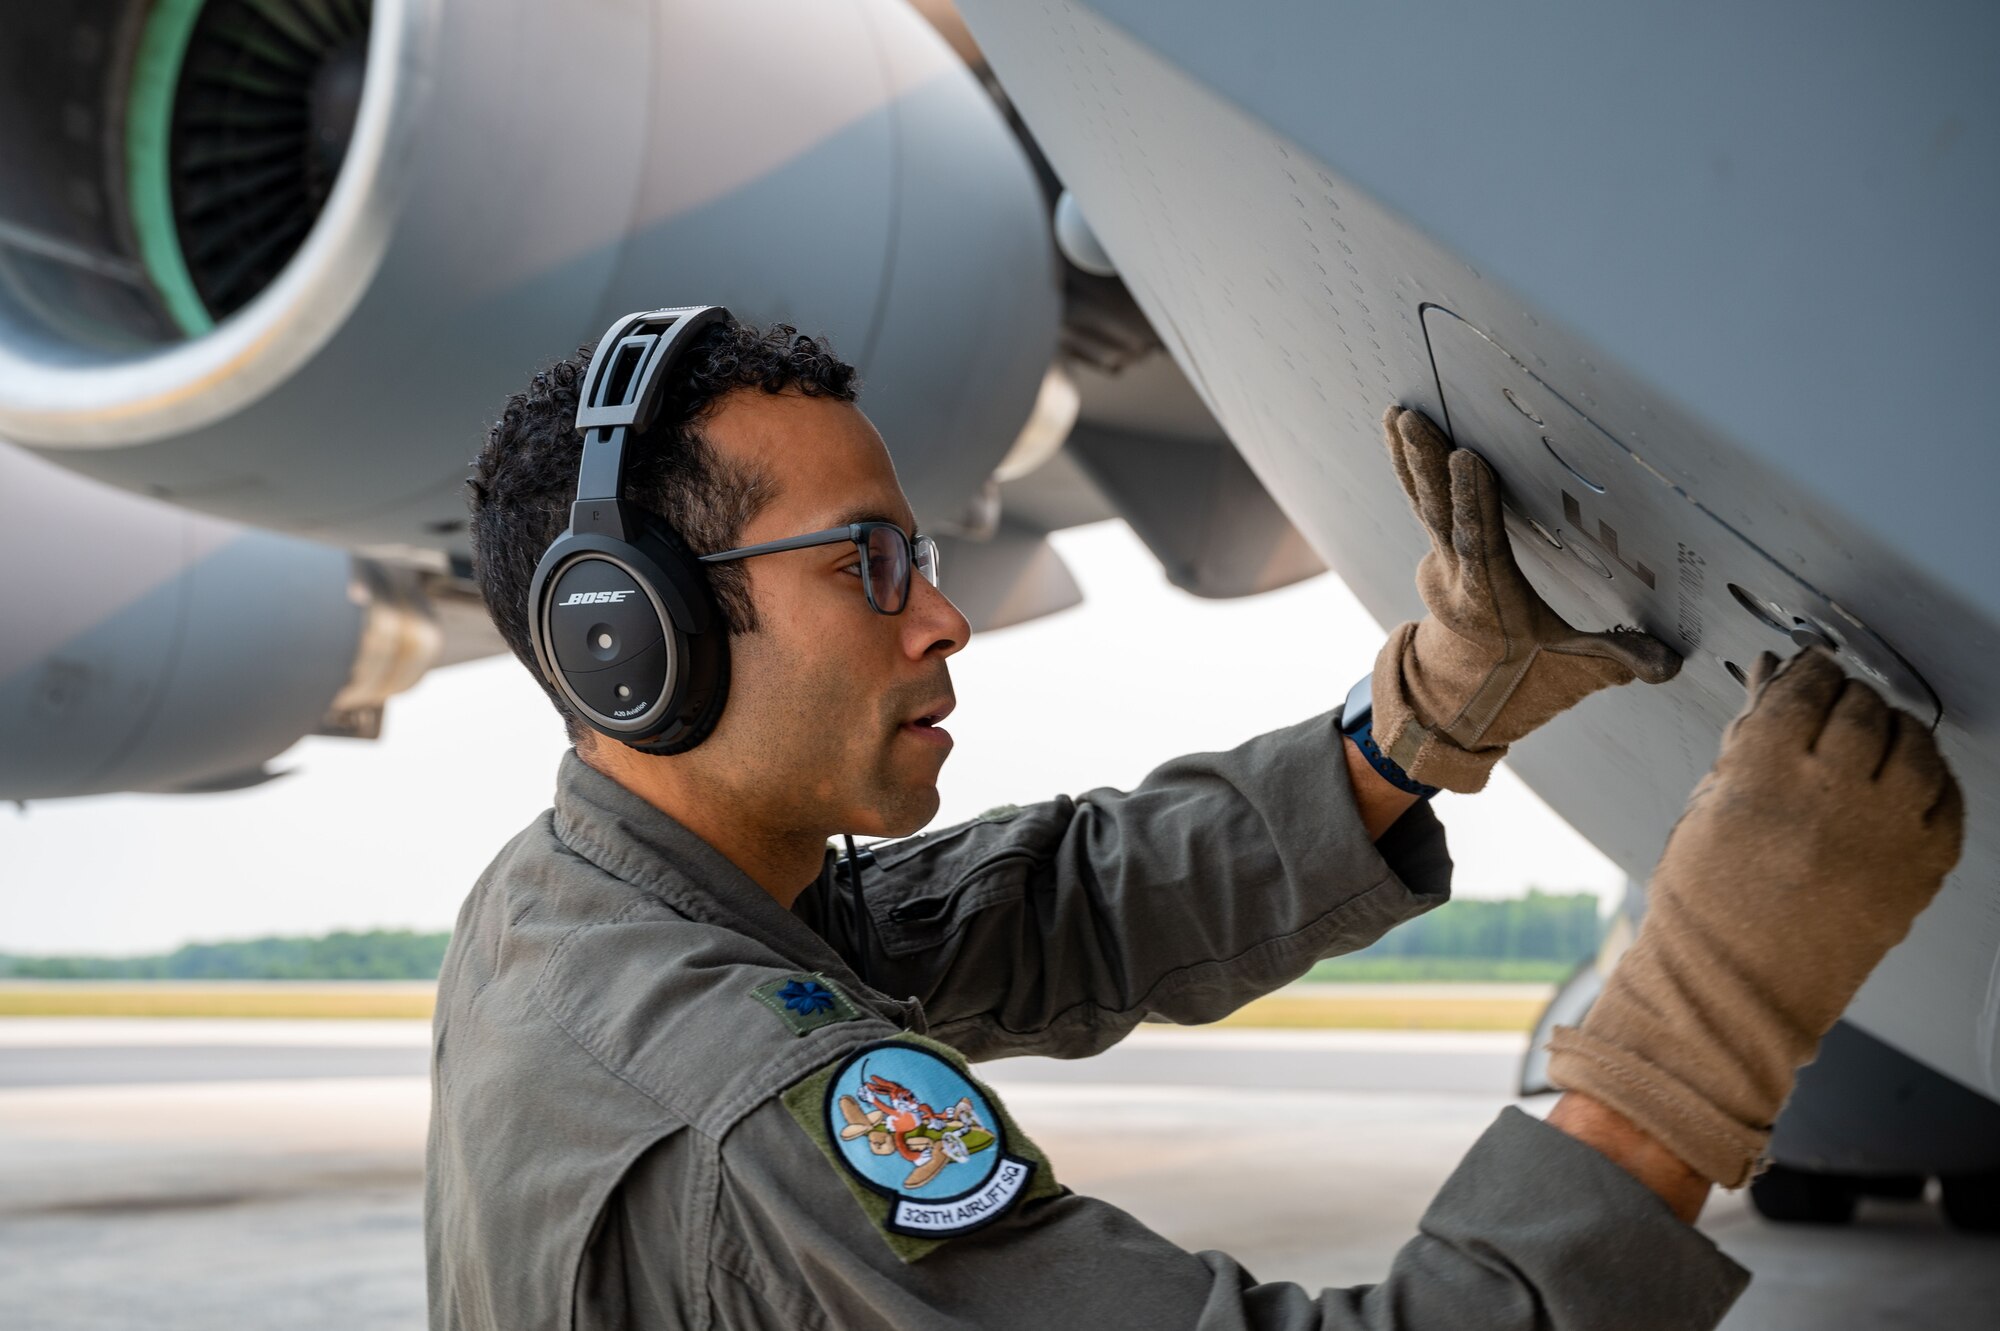 Lt. Col. Ryan Cox, 326th Airlift Squadron pilot, performs a preflight inspection on a C-17 Globemaster III during the 2023 hurricane evacuation exercise at Dover Air Force Base, Delaware, June 6, 2023. The C-17 was one of six Globemaster IIIs that departed Dover AFB during the hurricane evacuation exercise. (U.S. Air Force photo by Airman 1st Class Amanda Jett)